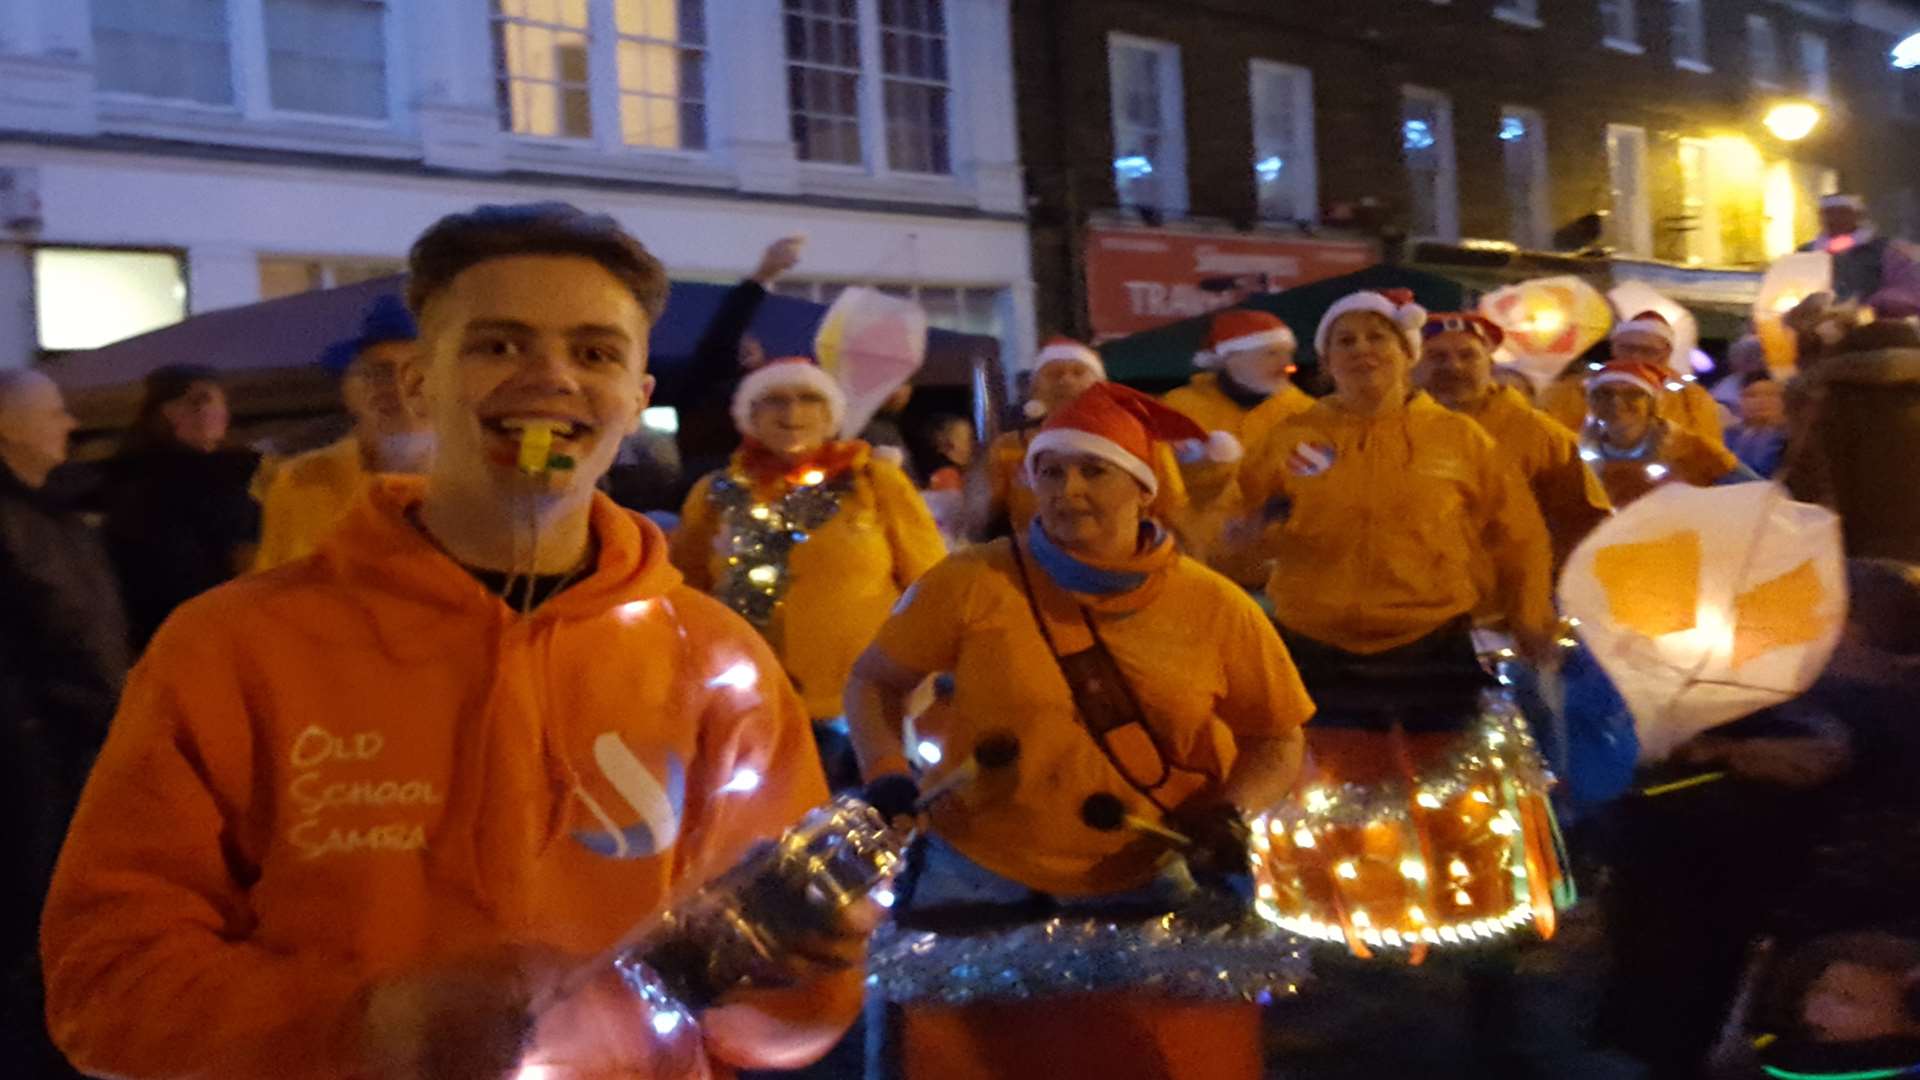 Members of Old School Samba drummed their way down the High Street and Broadway